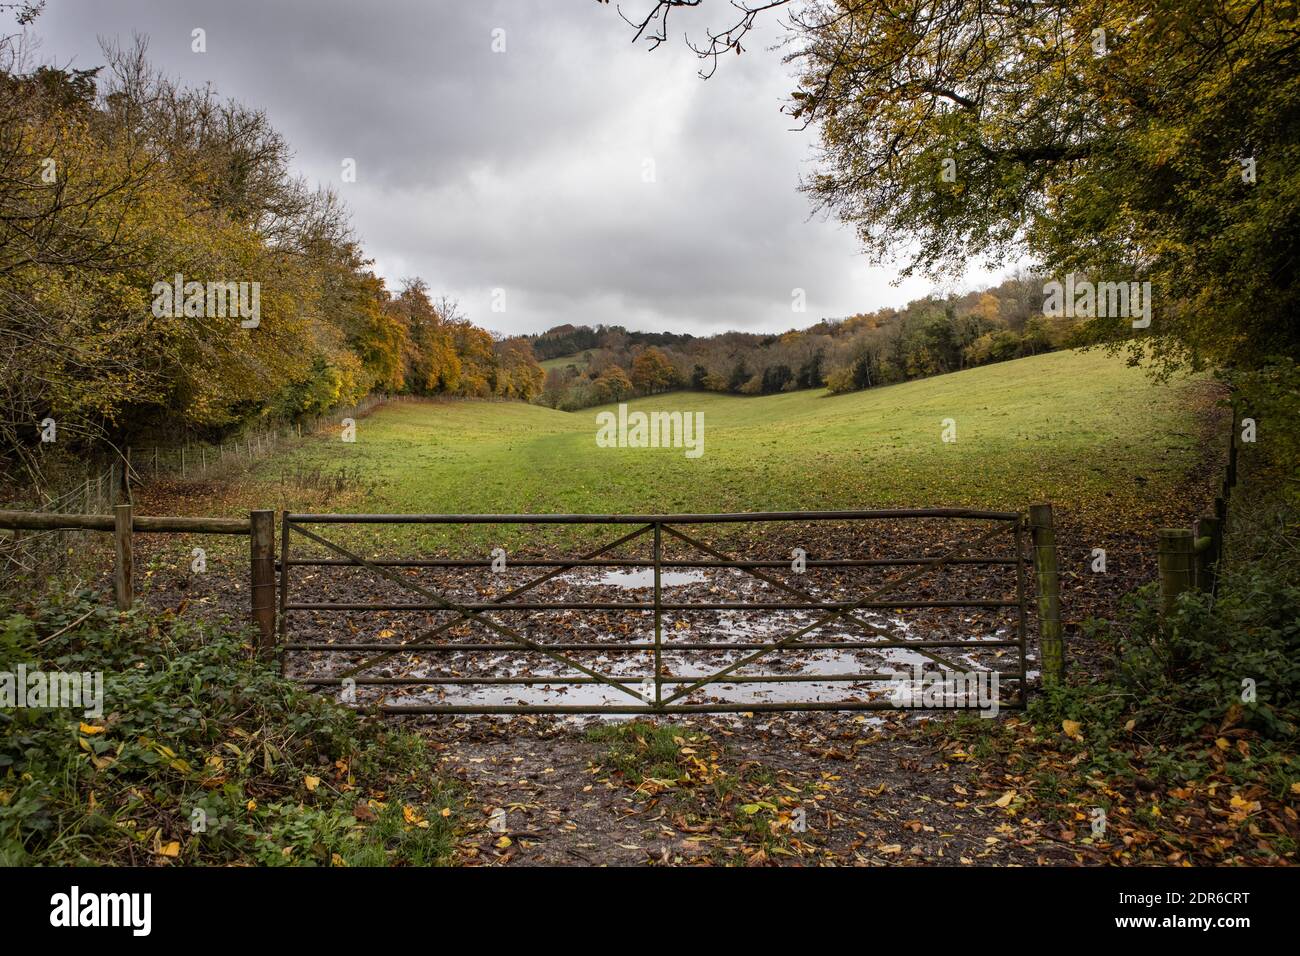 A gate in leading into a farmer’s field lined with trees showing seasonal autumnal colours of brown and orange Stock Photo